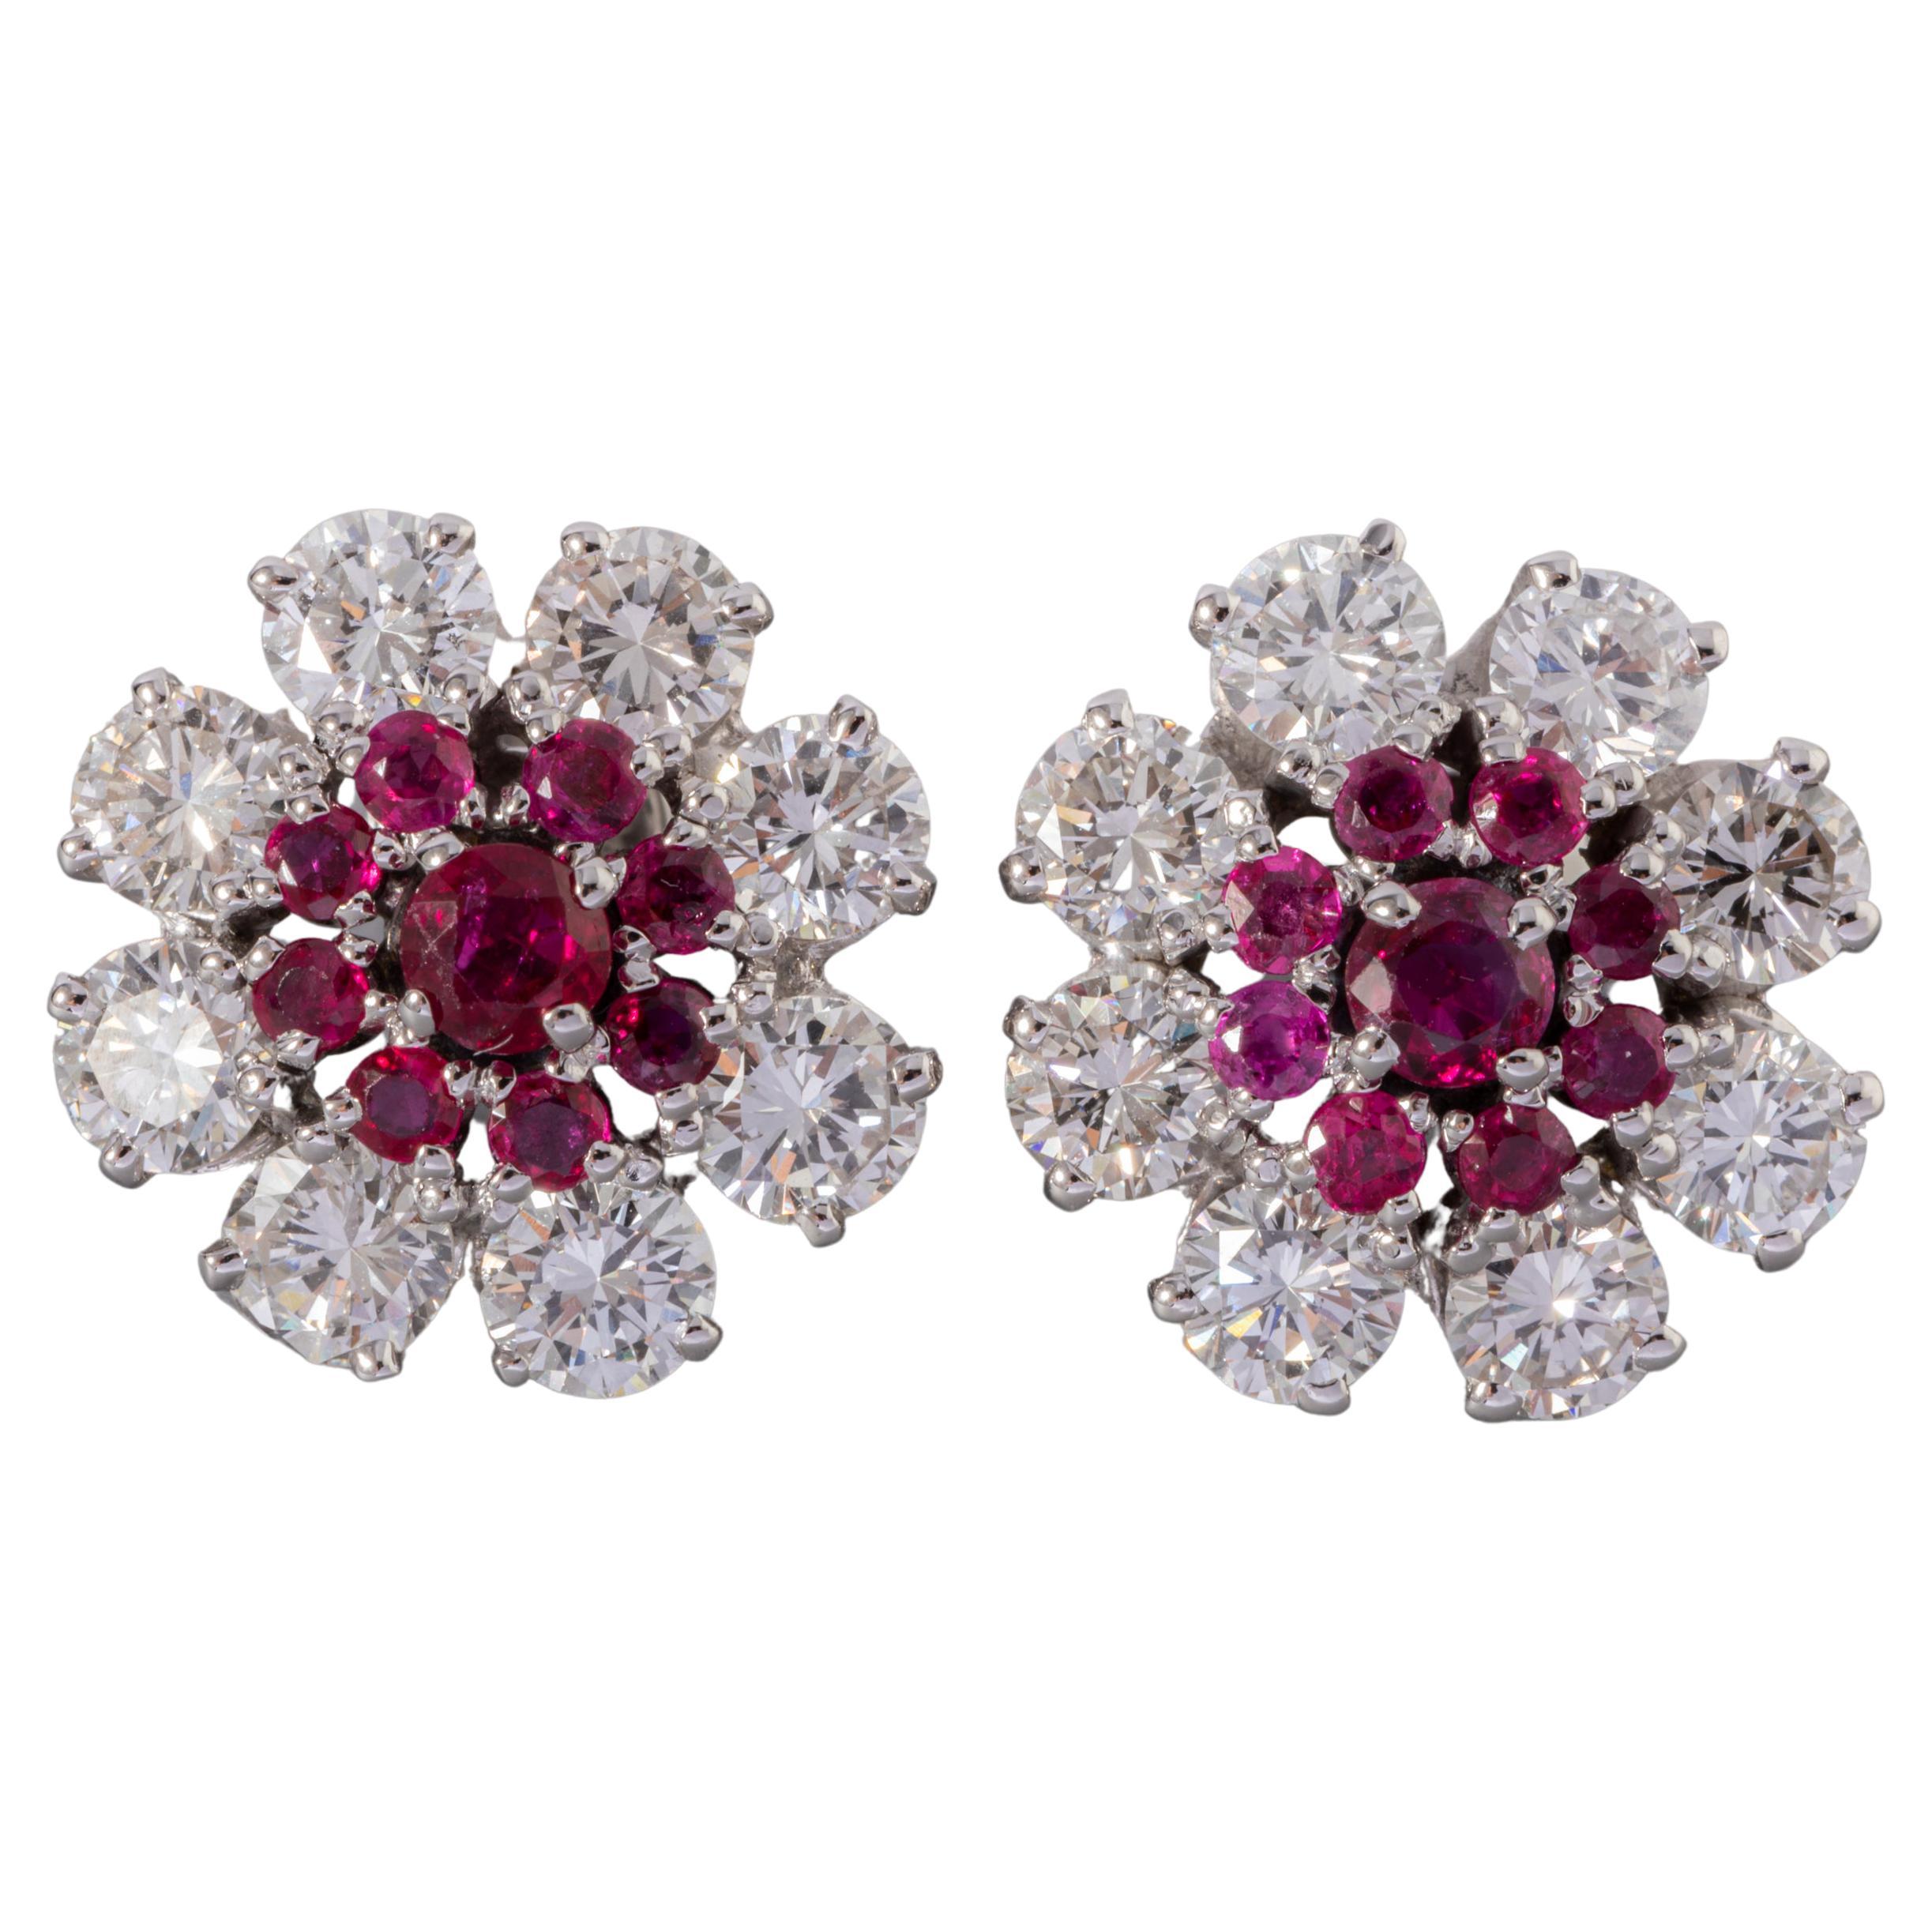 4 Carats Diamonds and 1 Carat Rubies Vintage Earrings For Sale